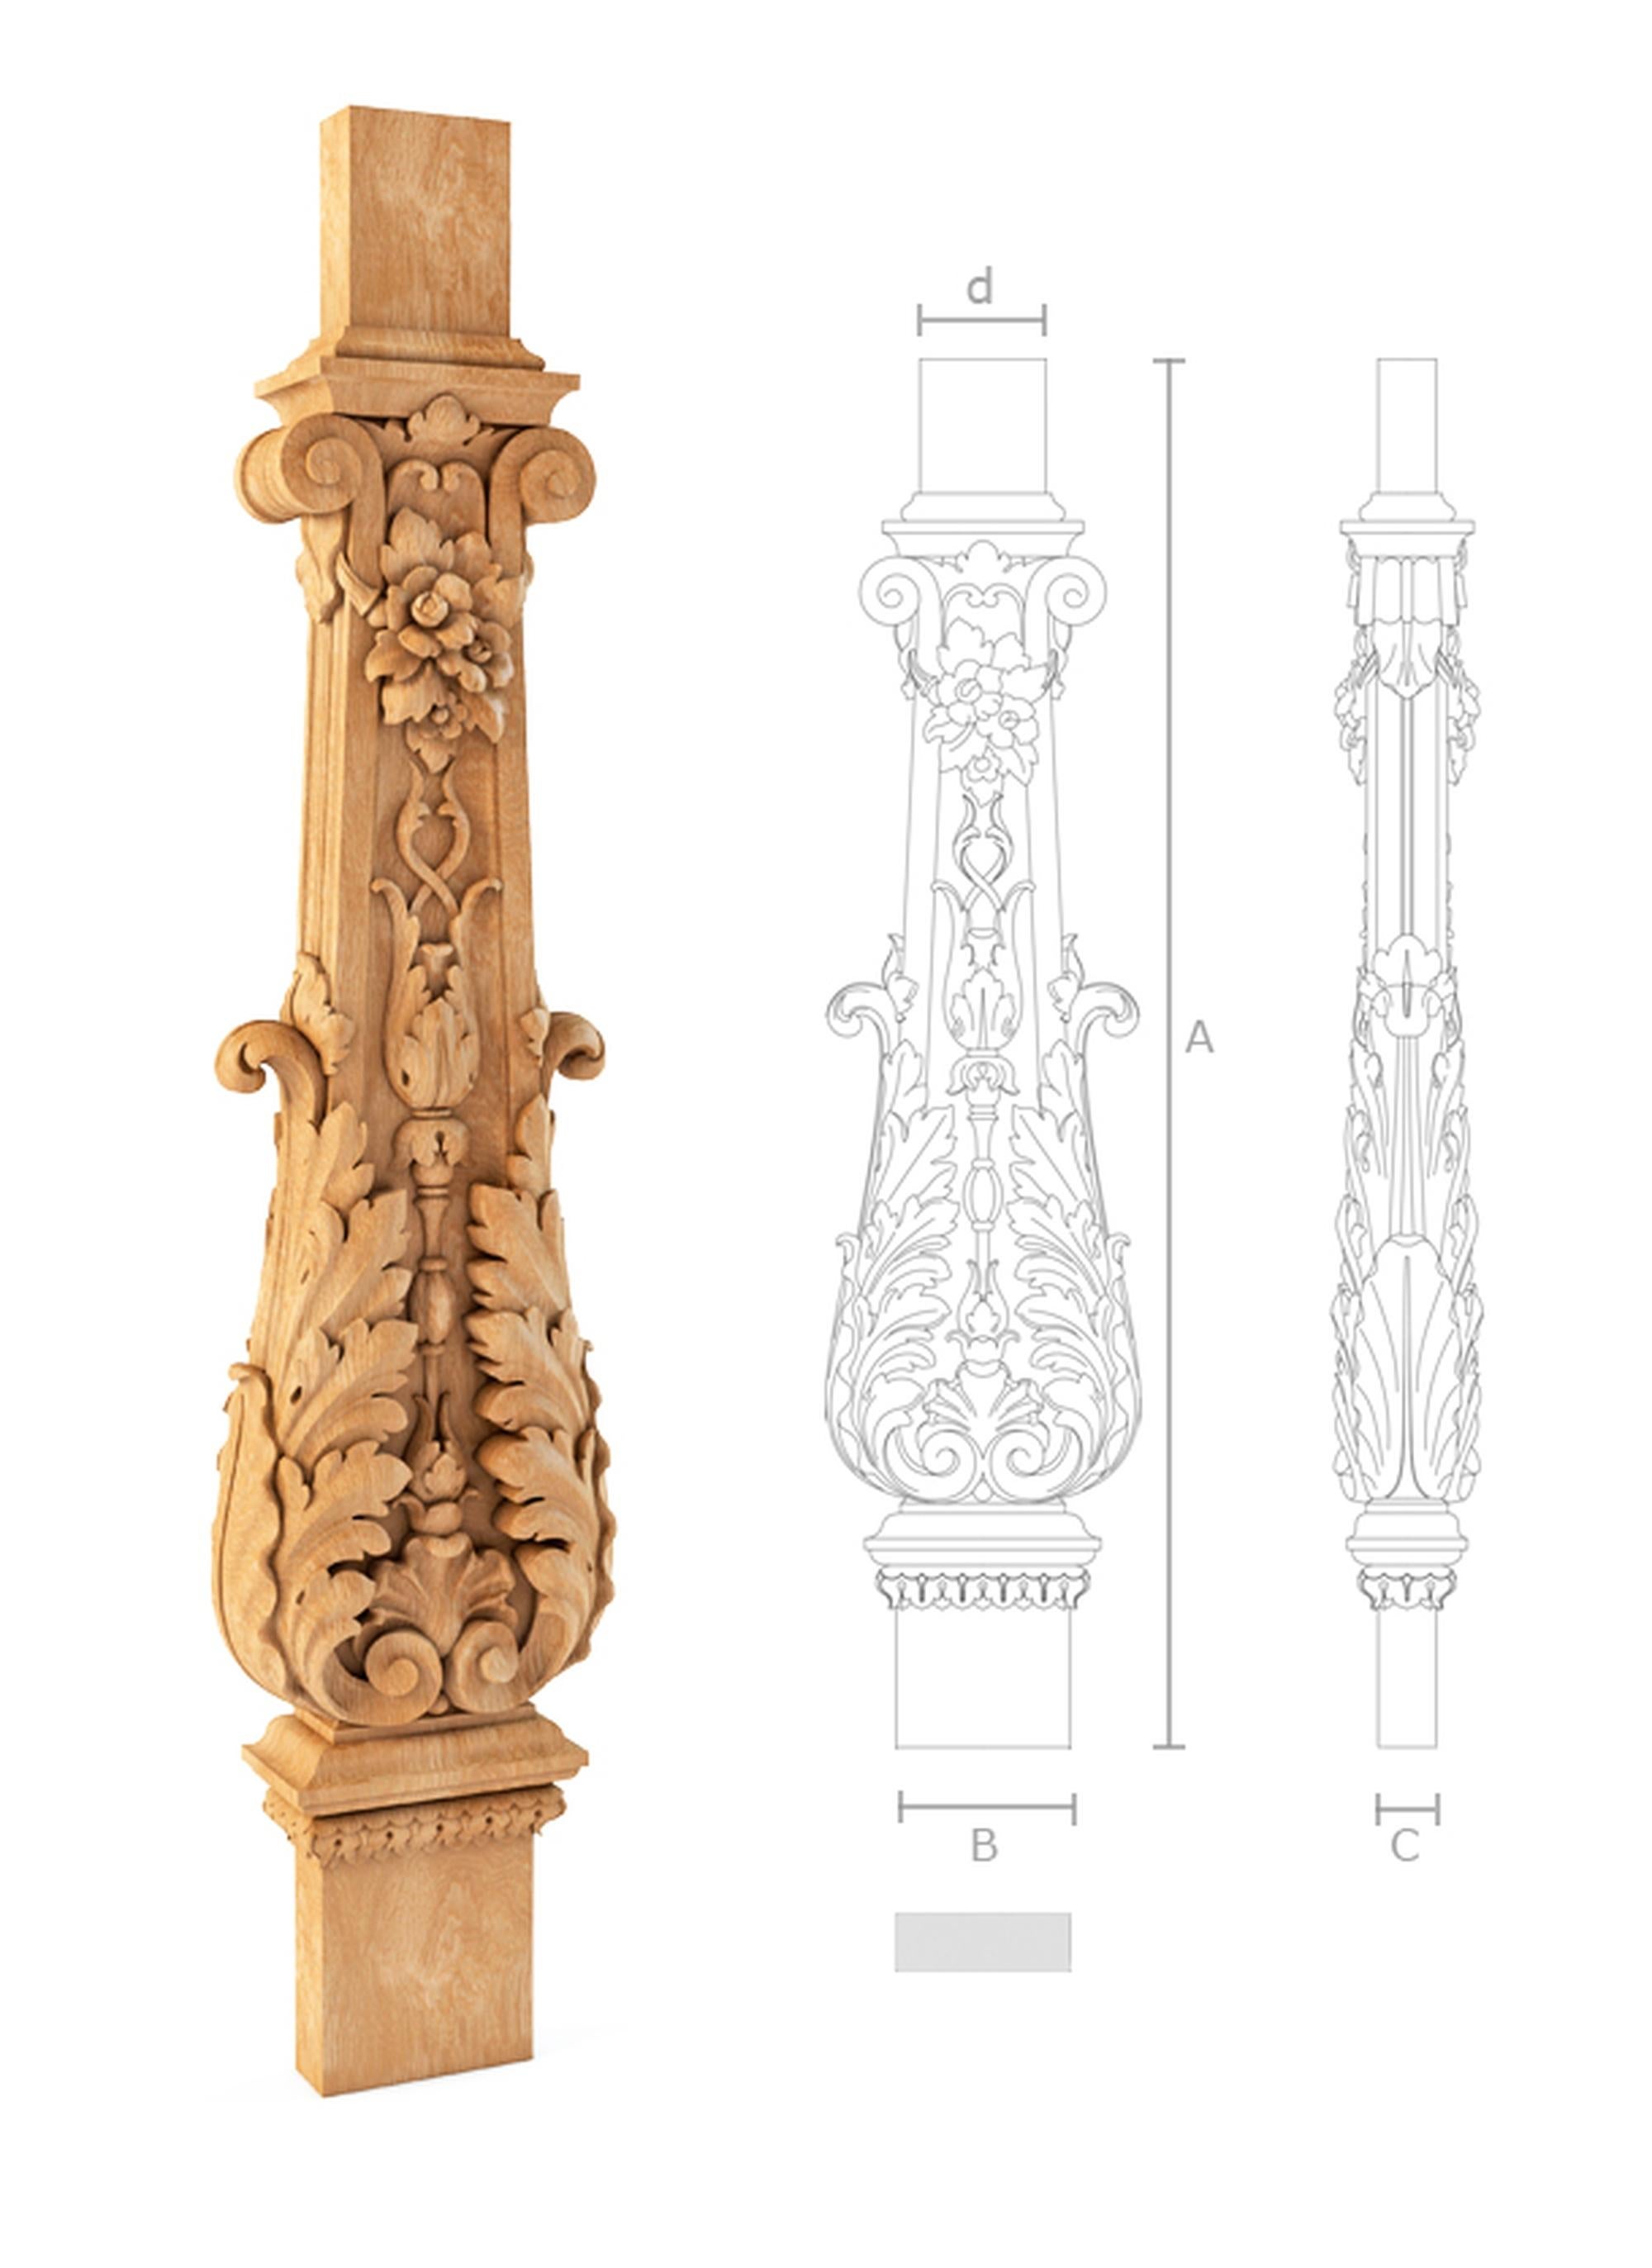 Unfinished high quality carved baluster from oak or beech of your choice.

>> SKU: L-106

>> Dimensions (A  x B x C x d x f):

- 37.8